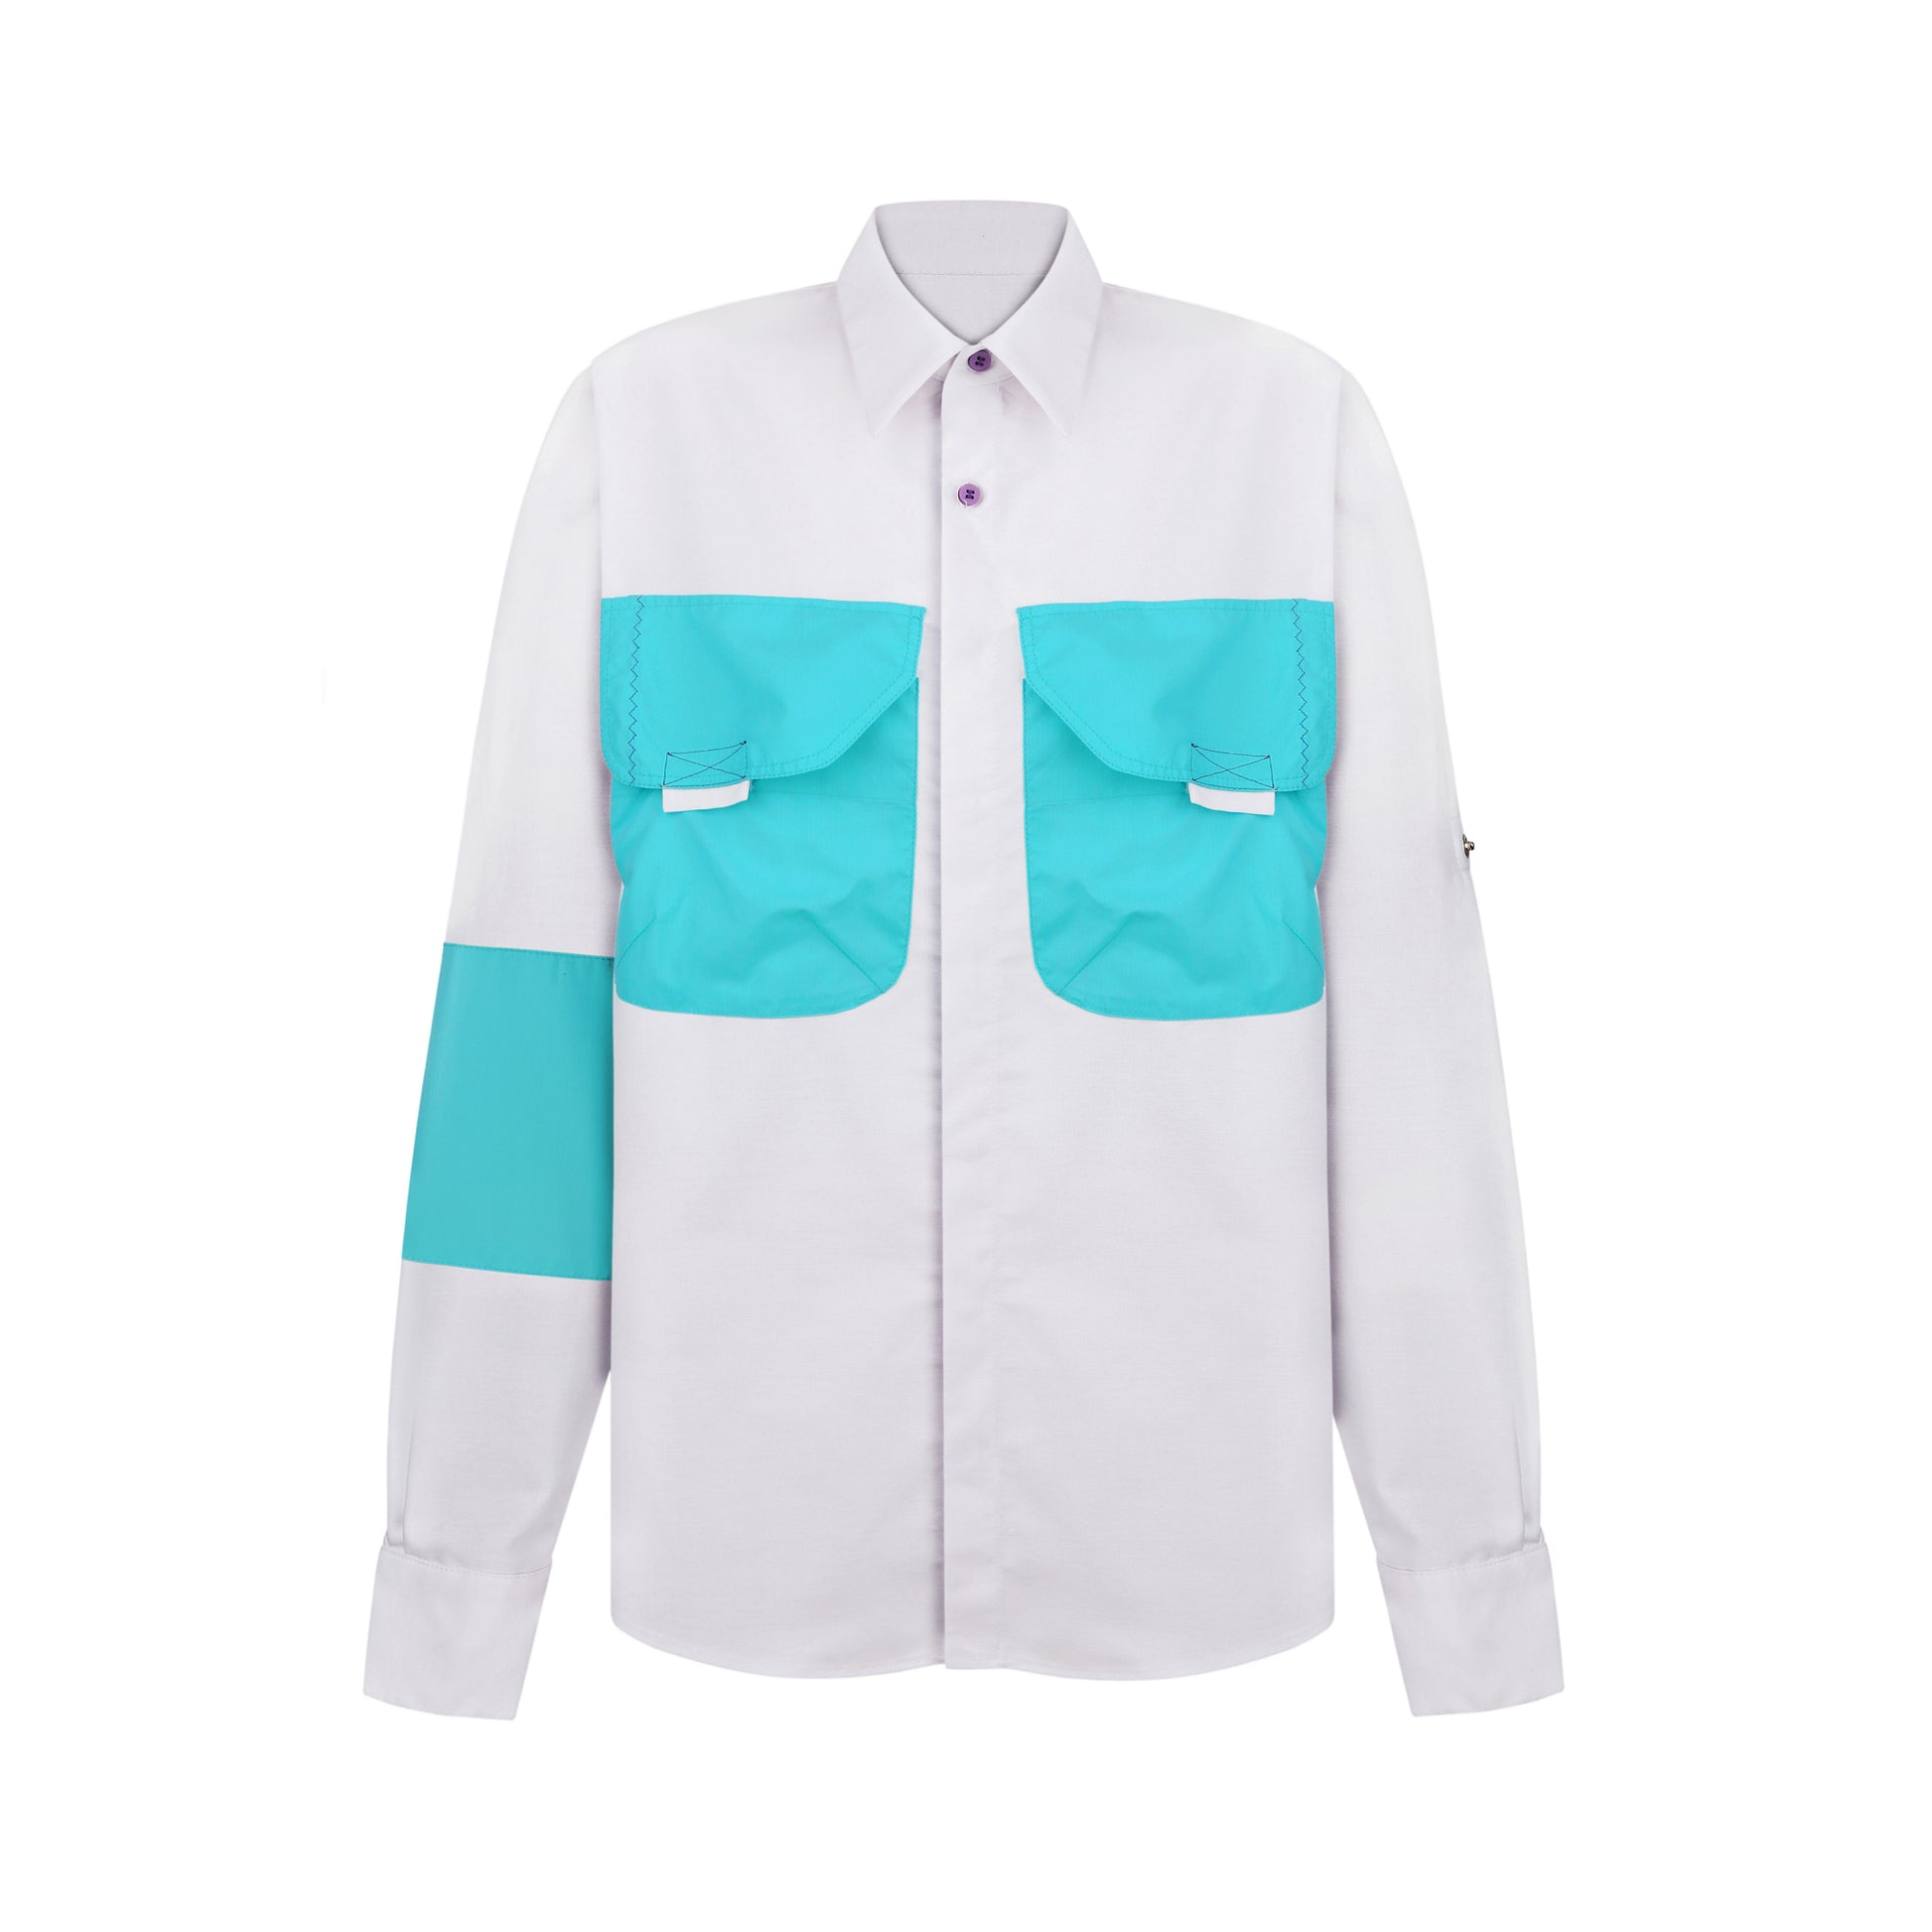 Casual designer double pocket shirt from REwind